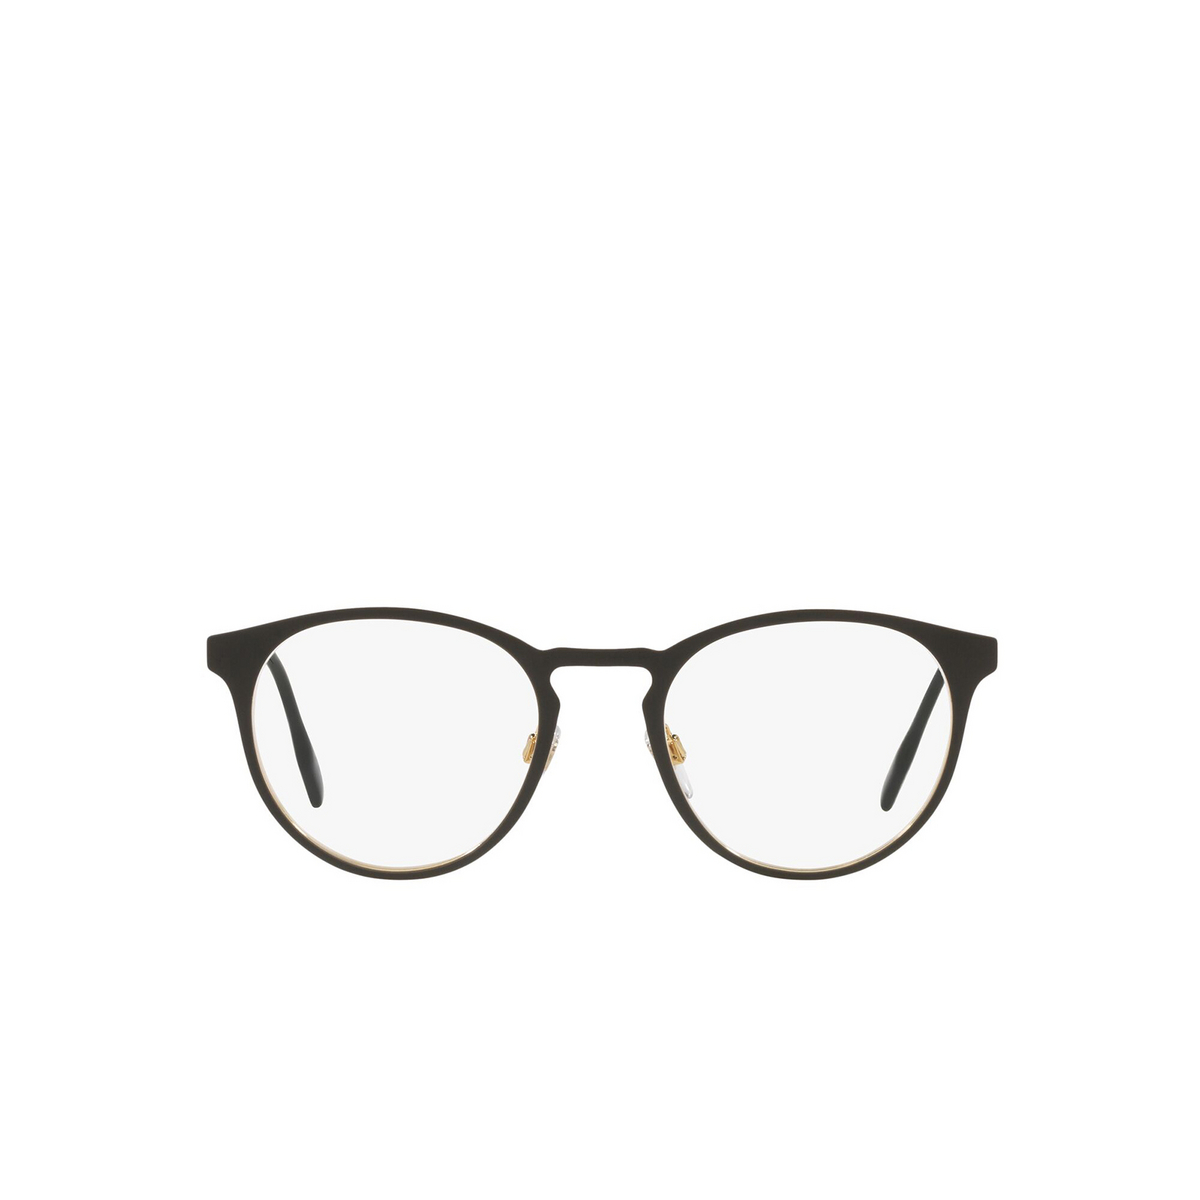 Burberry® Round Eyeglasses: York BE1360 color Black 1017 - front view.